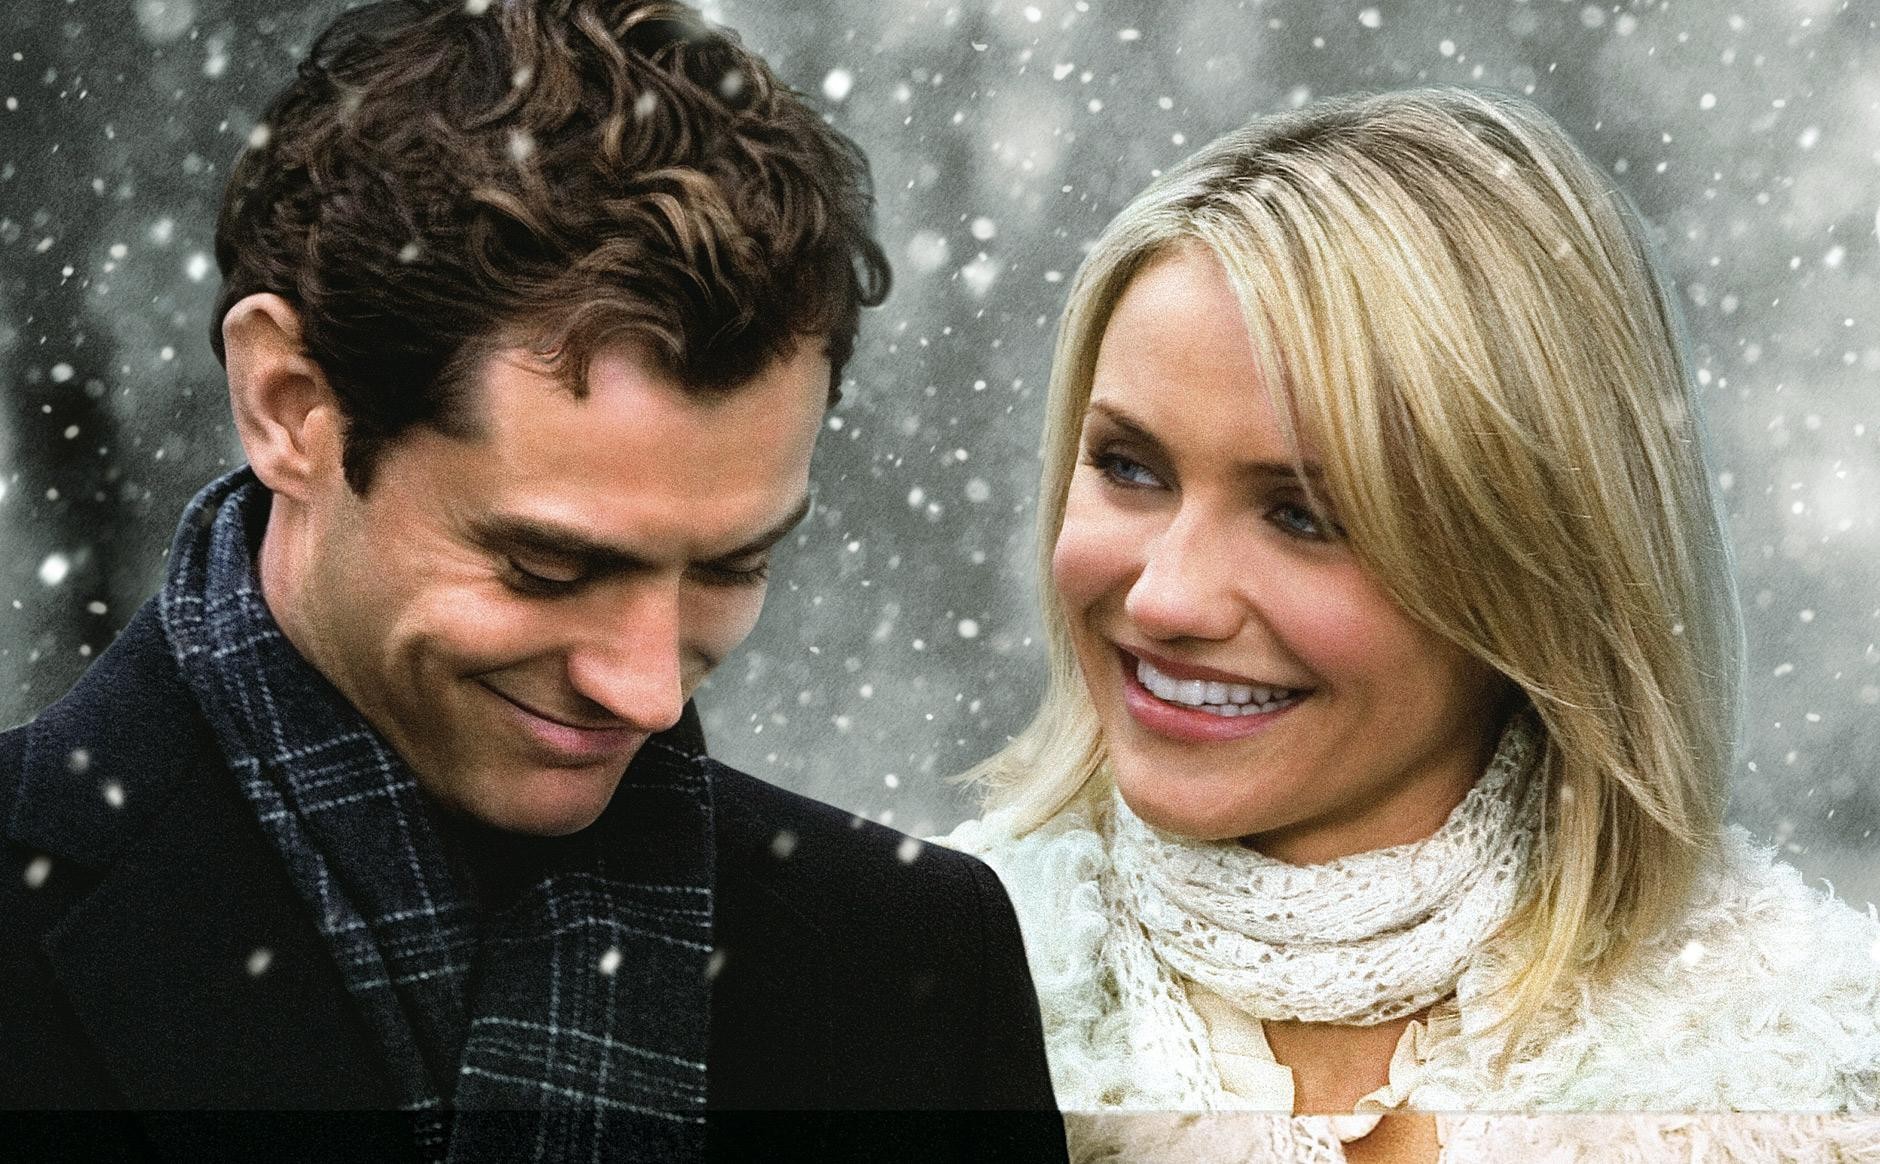 PHOTO: The Holiday starring Jude Law and Cameron Diaz, 2006.